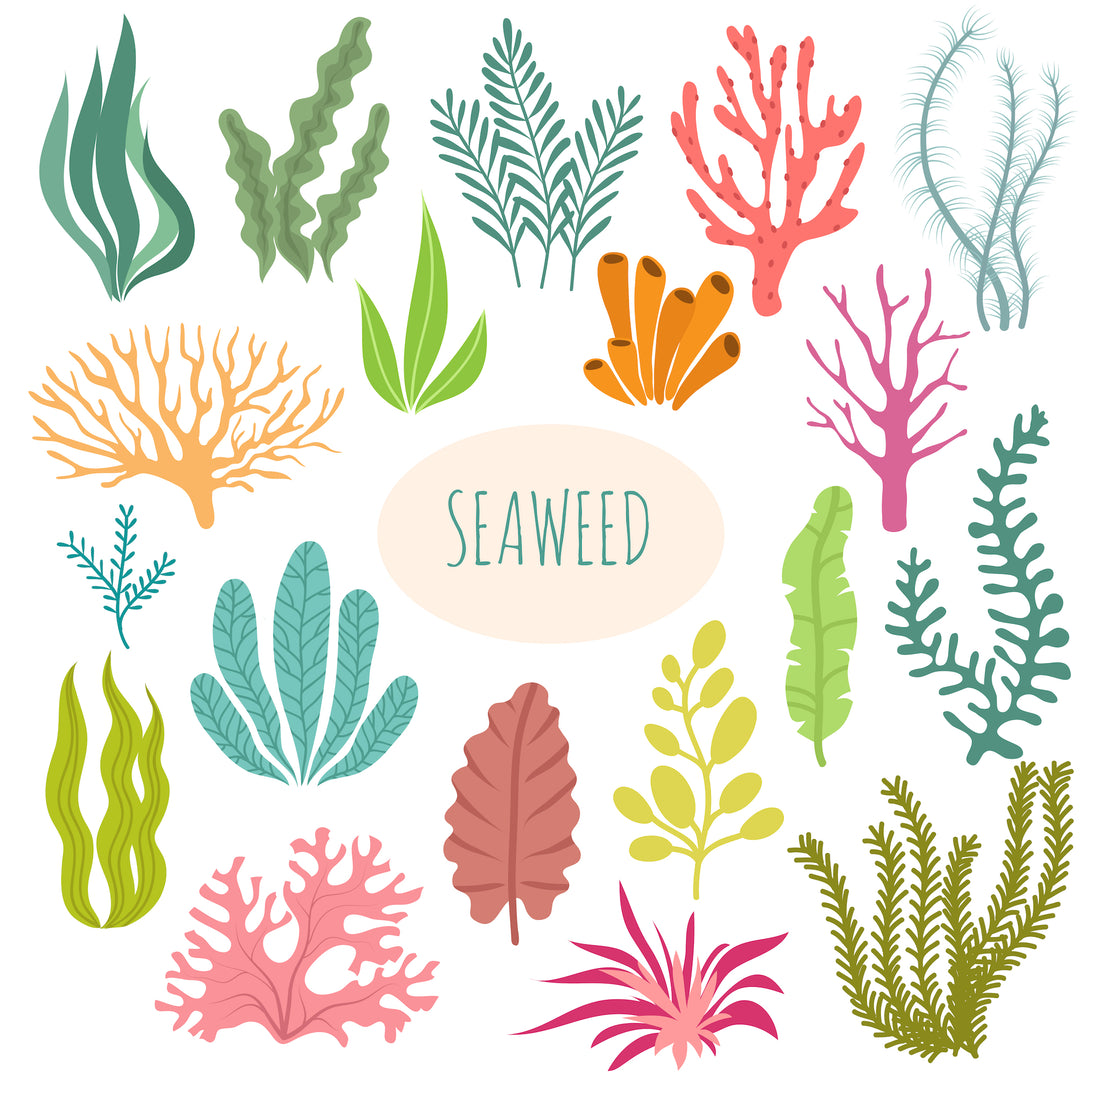 How to be a Smart Seaweed Shopper